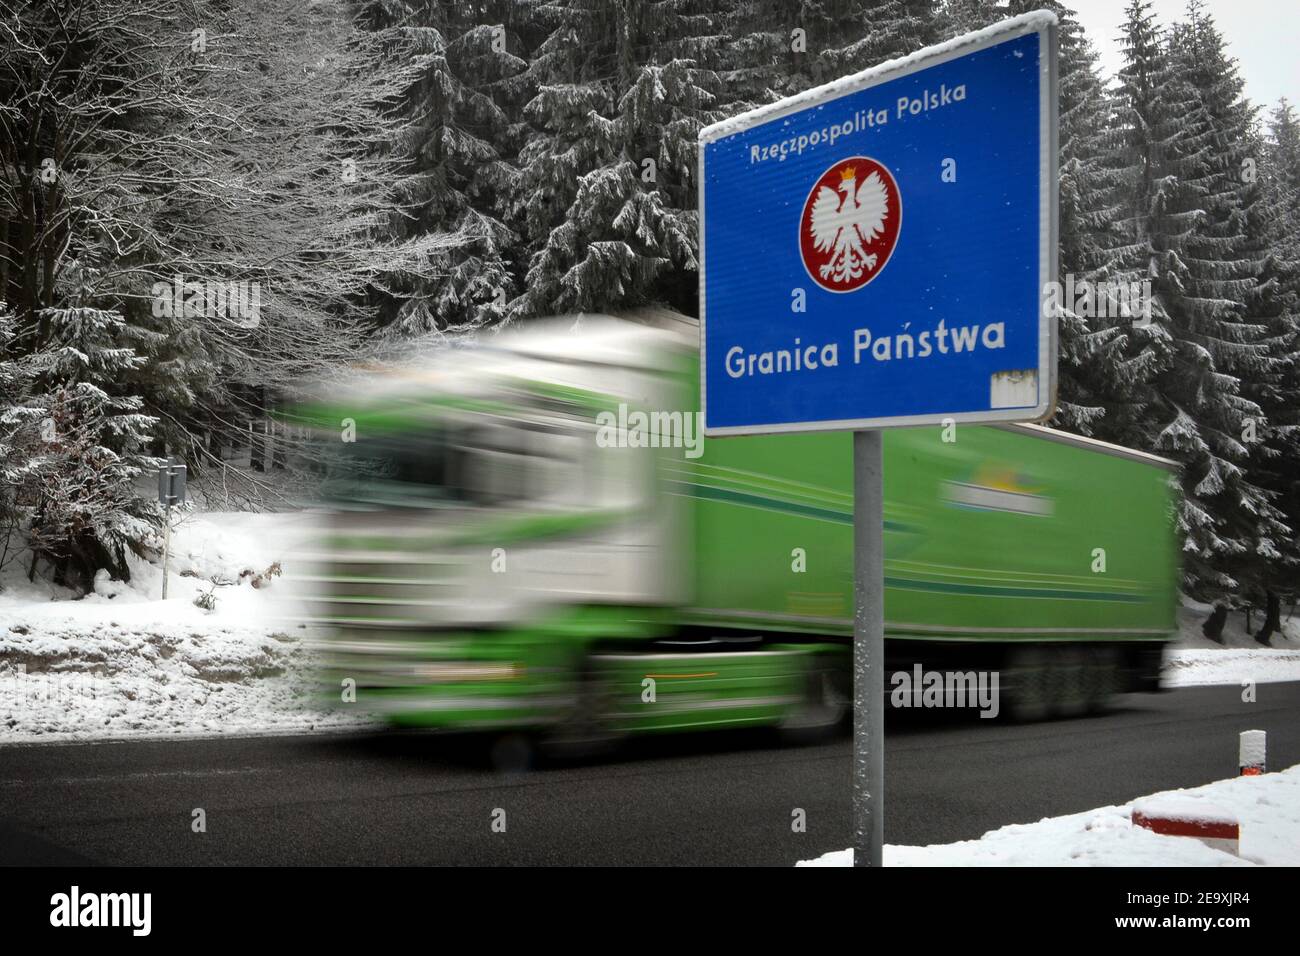 Harrachov, Czech Republic. 6th Feb, 2021. The truck crossing the Border between Czech Republic an Poland in Harrachov (near Jakuszyce, Szklarska Poreba in Poland). Since 5th February 2021, new conditions for entry into the Czech Republic are in force. The rules for entering the territory of the Czech Republic and quarantine measures are defined by the Ministry of Health. The ban does not apply to foreigners working and studying in the Czech Republic, people visiting close relatives, medical facilities and care homes, or undertaking a trip to attend a wedding or funeral. (Credit Image: © Stock Photo